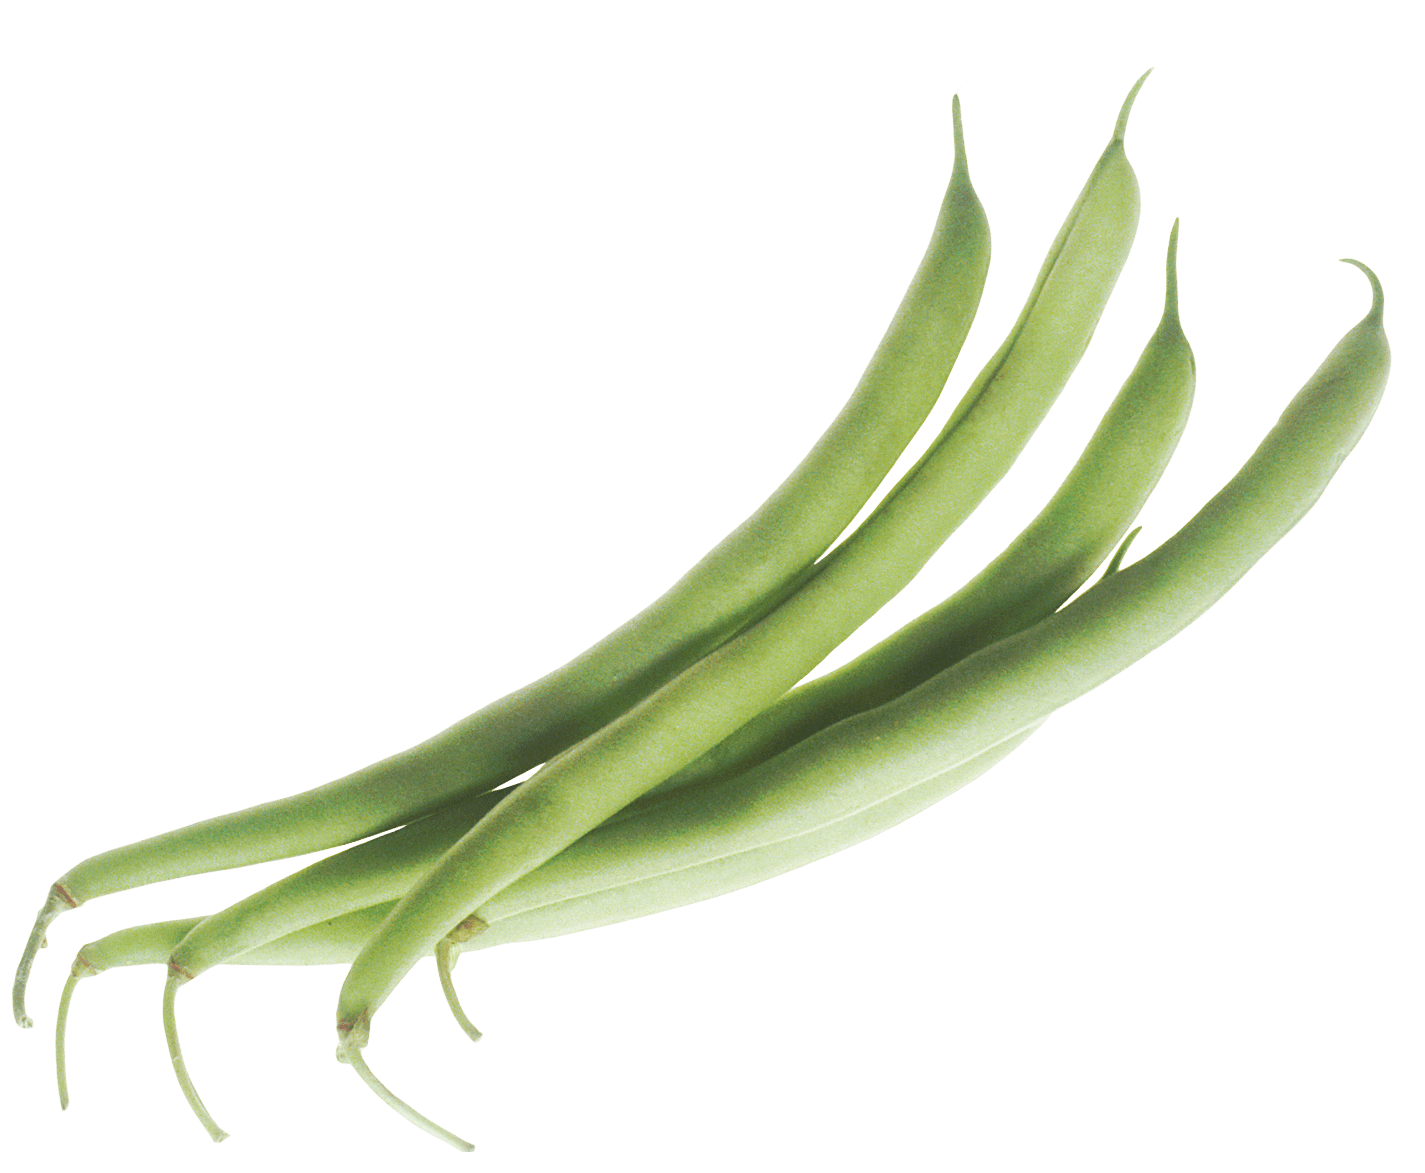 Green Beans PNG Transparent Images - PNG All